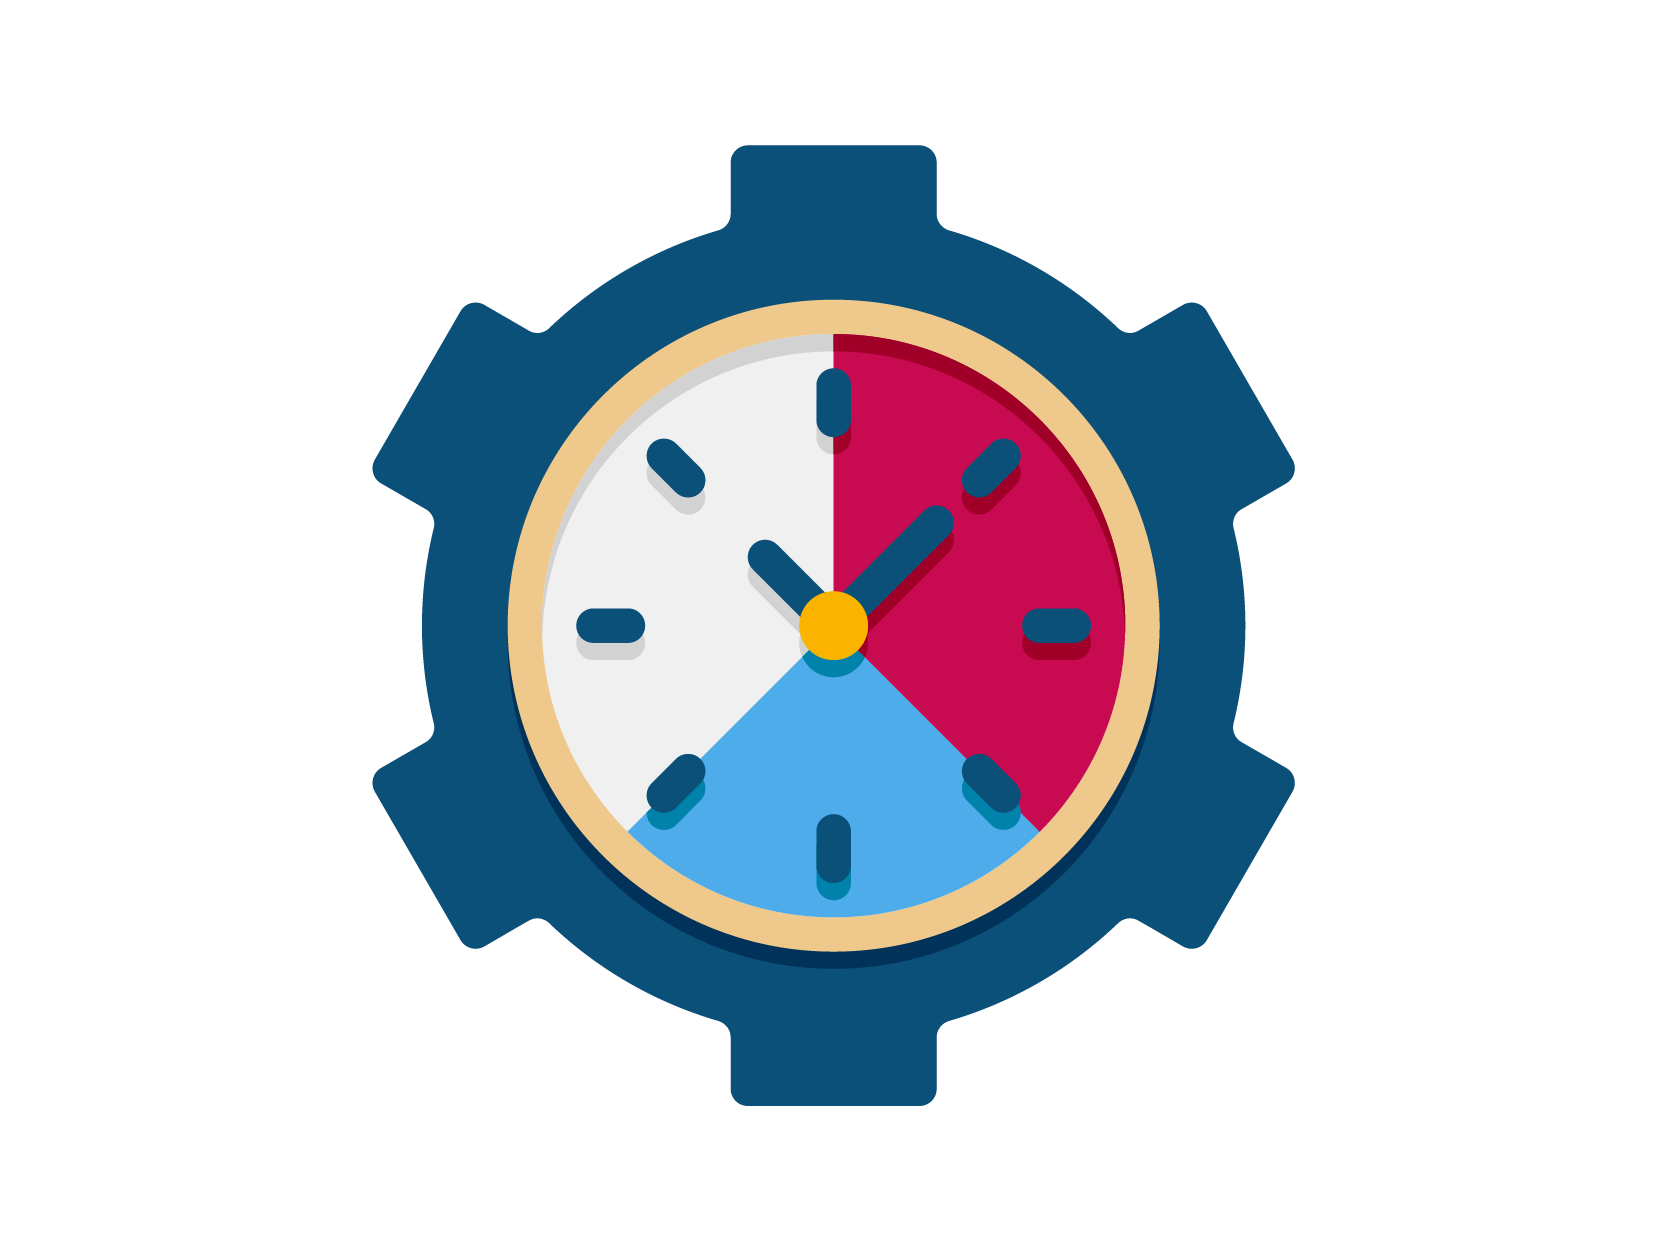 Clock with three evenly colored sectors in white, pink, and blue 